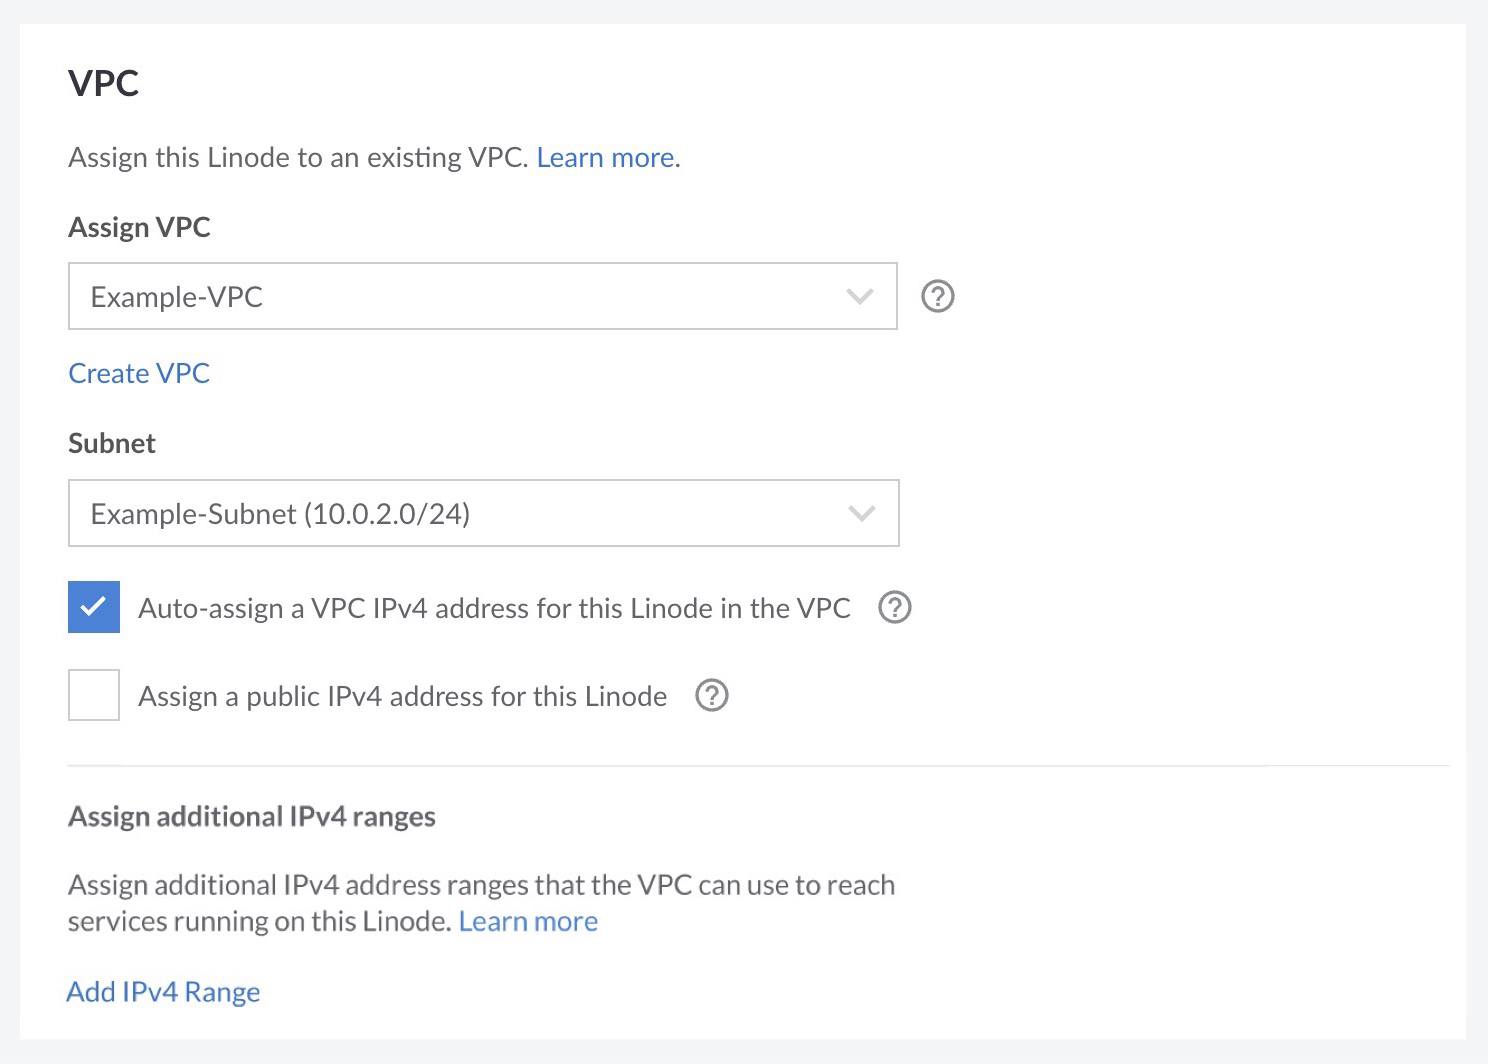 Screenshot of the VPC section of the Create Linode screen in the Cloud Manager